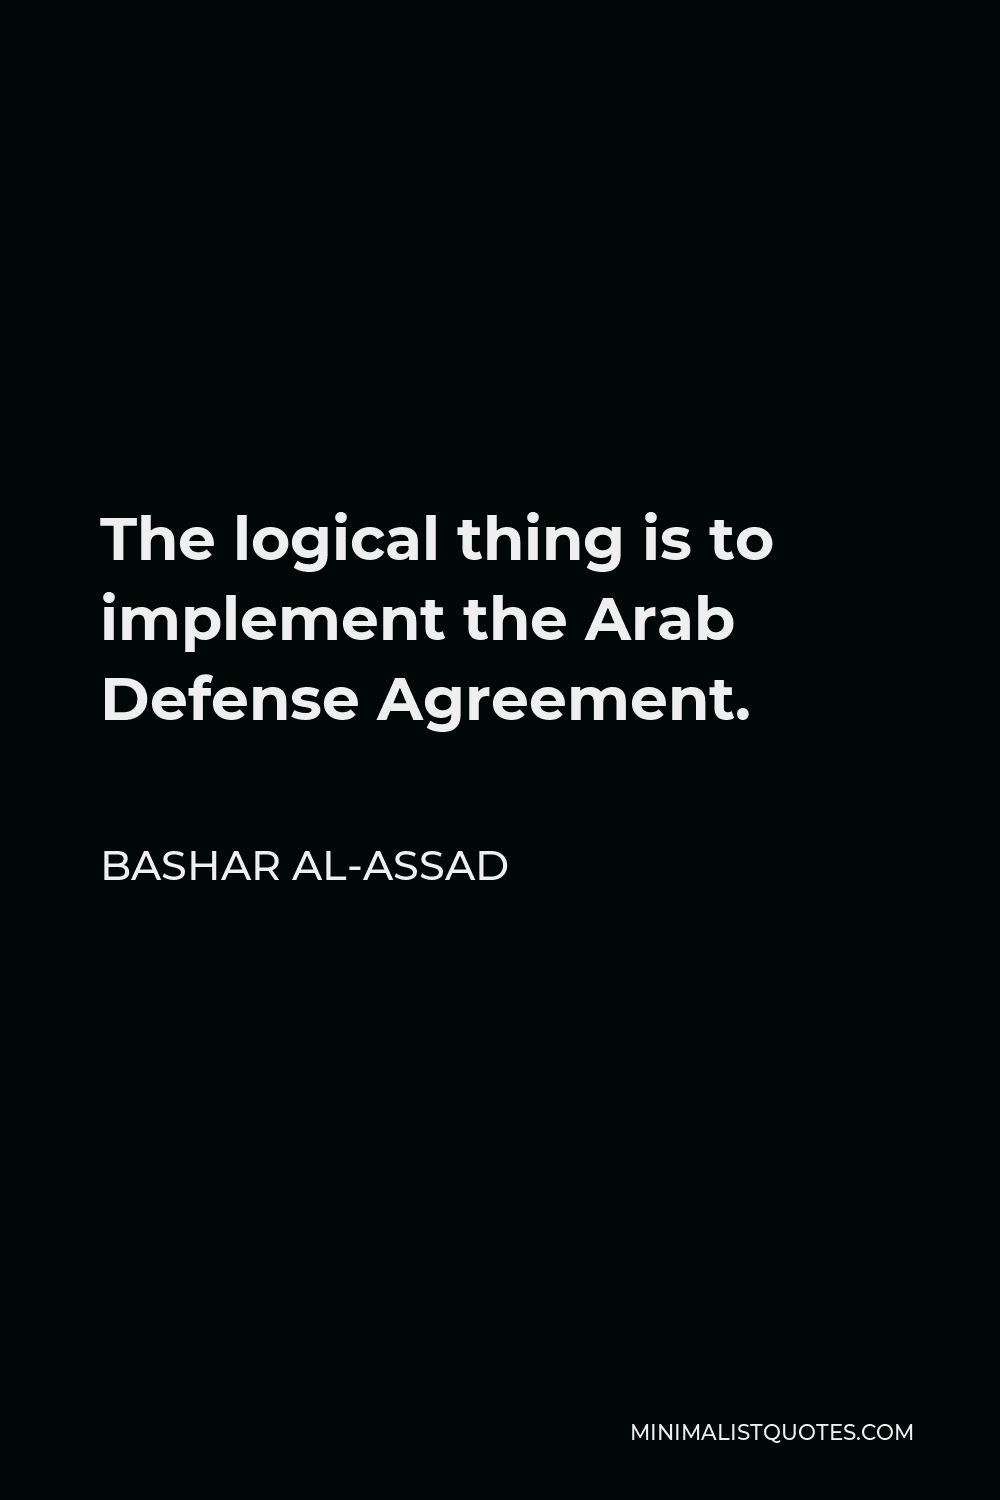 Bashar al-Assad Quote - The logical thing is to implement the Arab Defense Agreement.